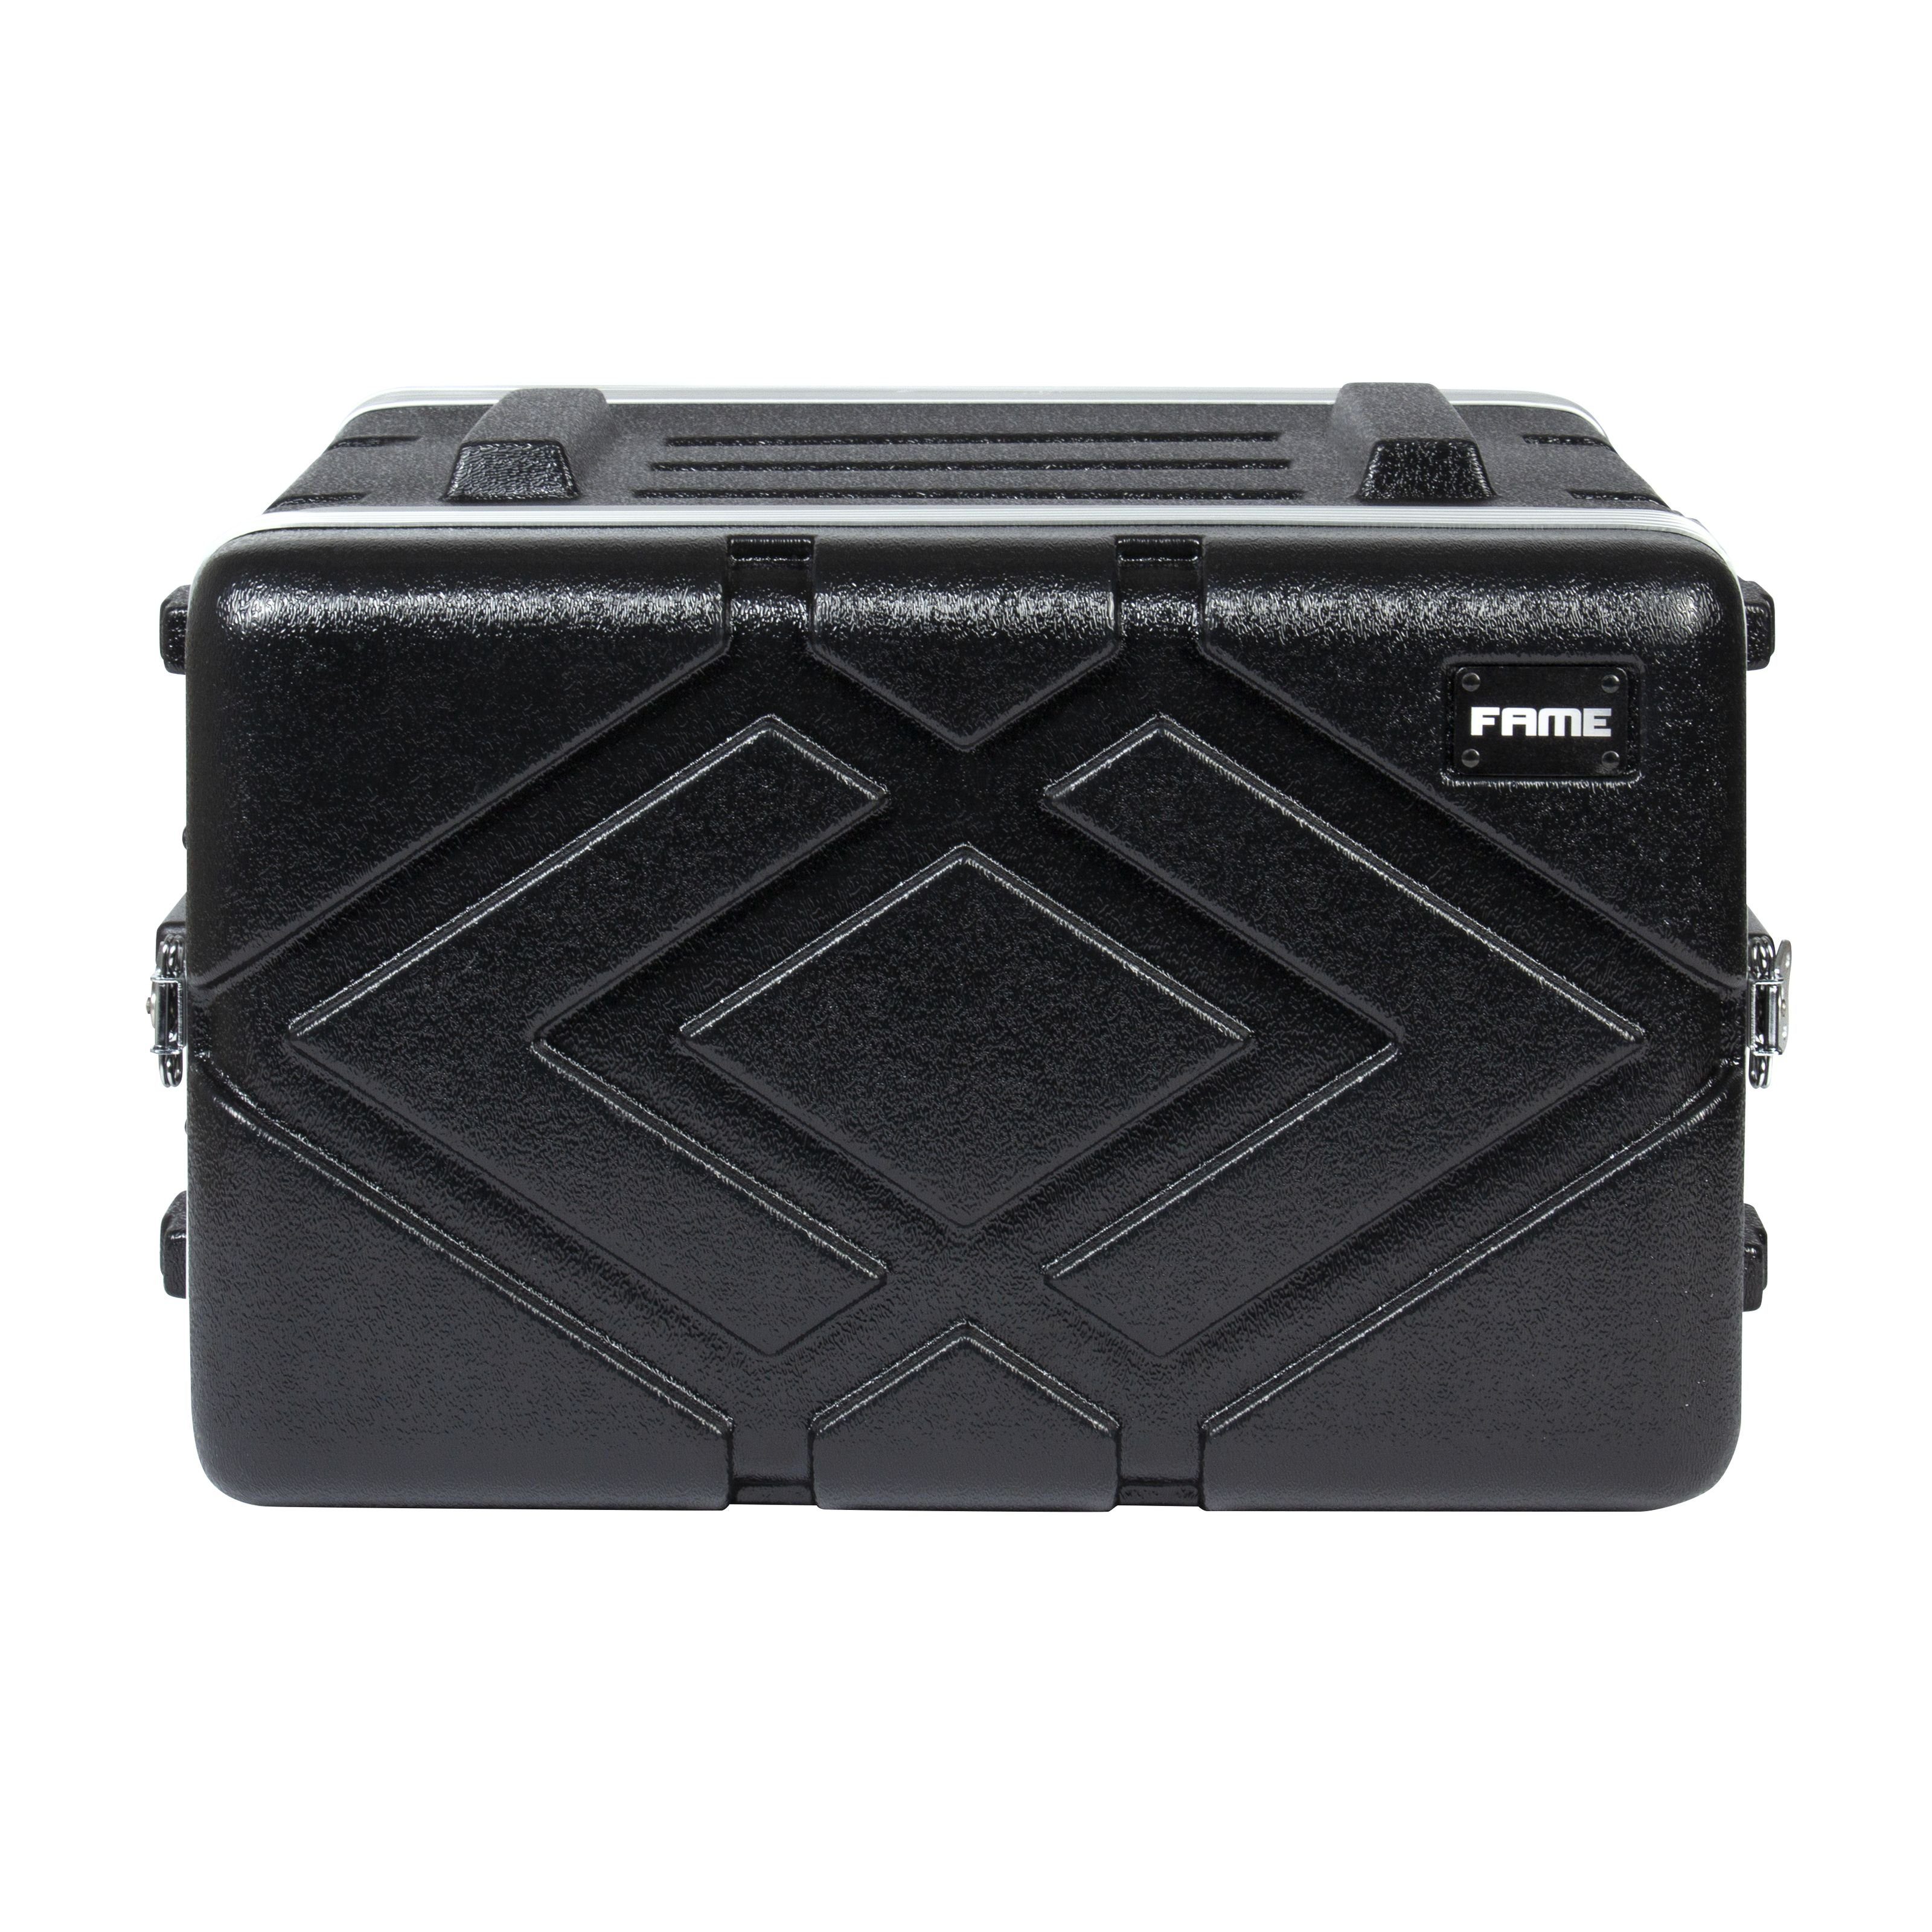 PVC-Case, Koffer, Audio 430mm Tiefe weRack MKII Fame deep 6HE